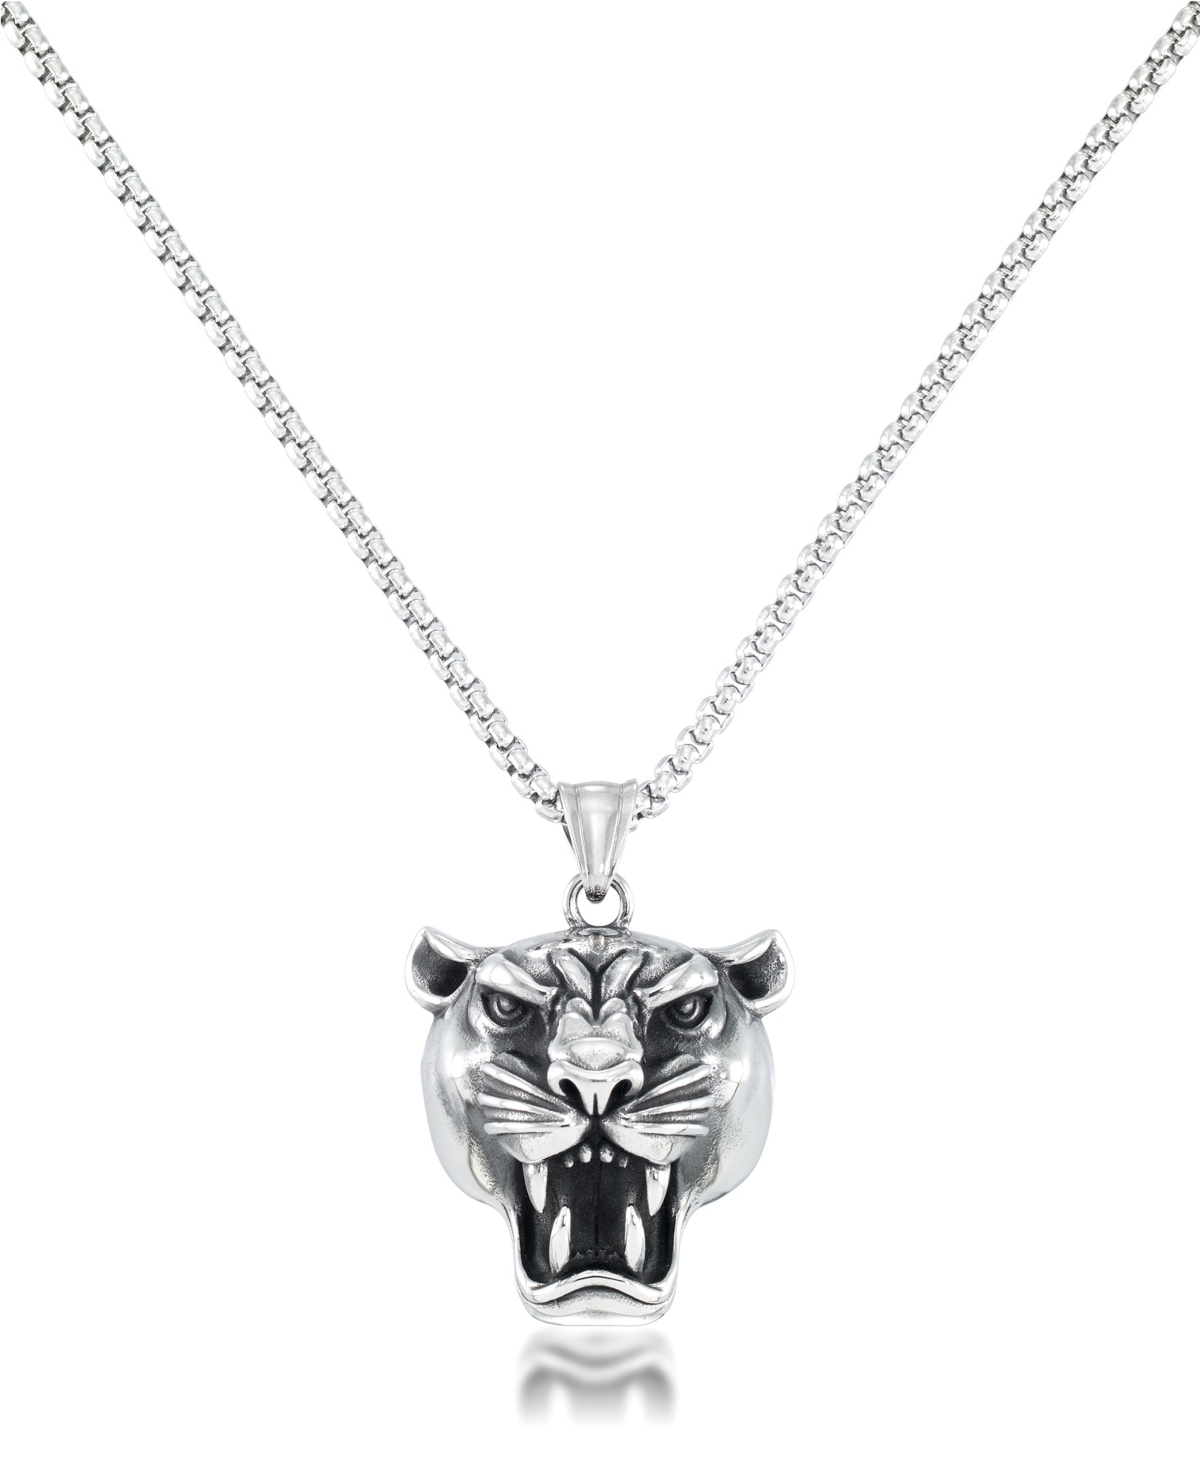 Men's Panther Head 24" Pendant Necklace in Stainless Steel - Stainless Steel